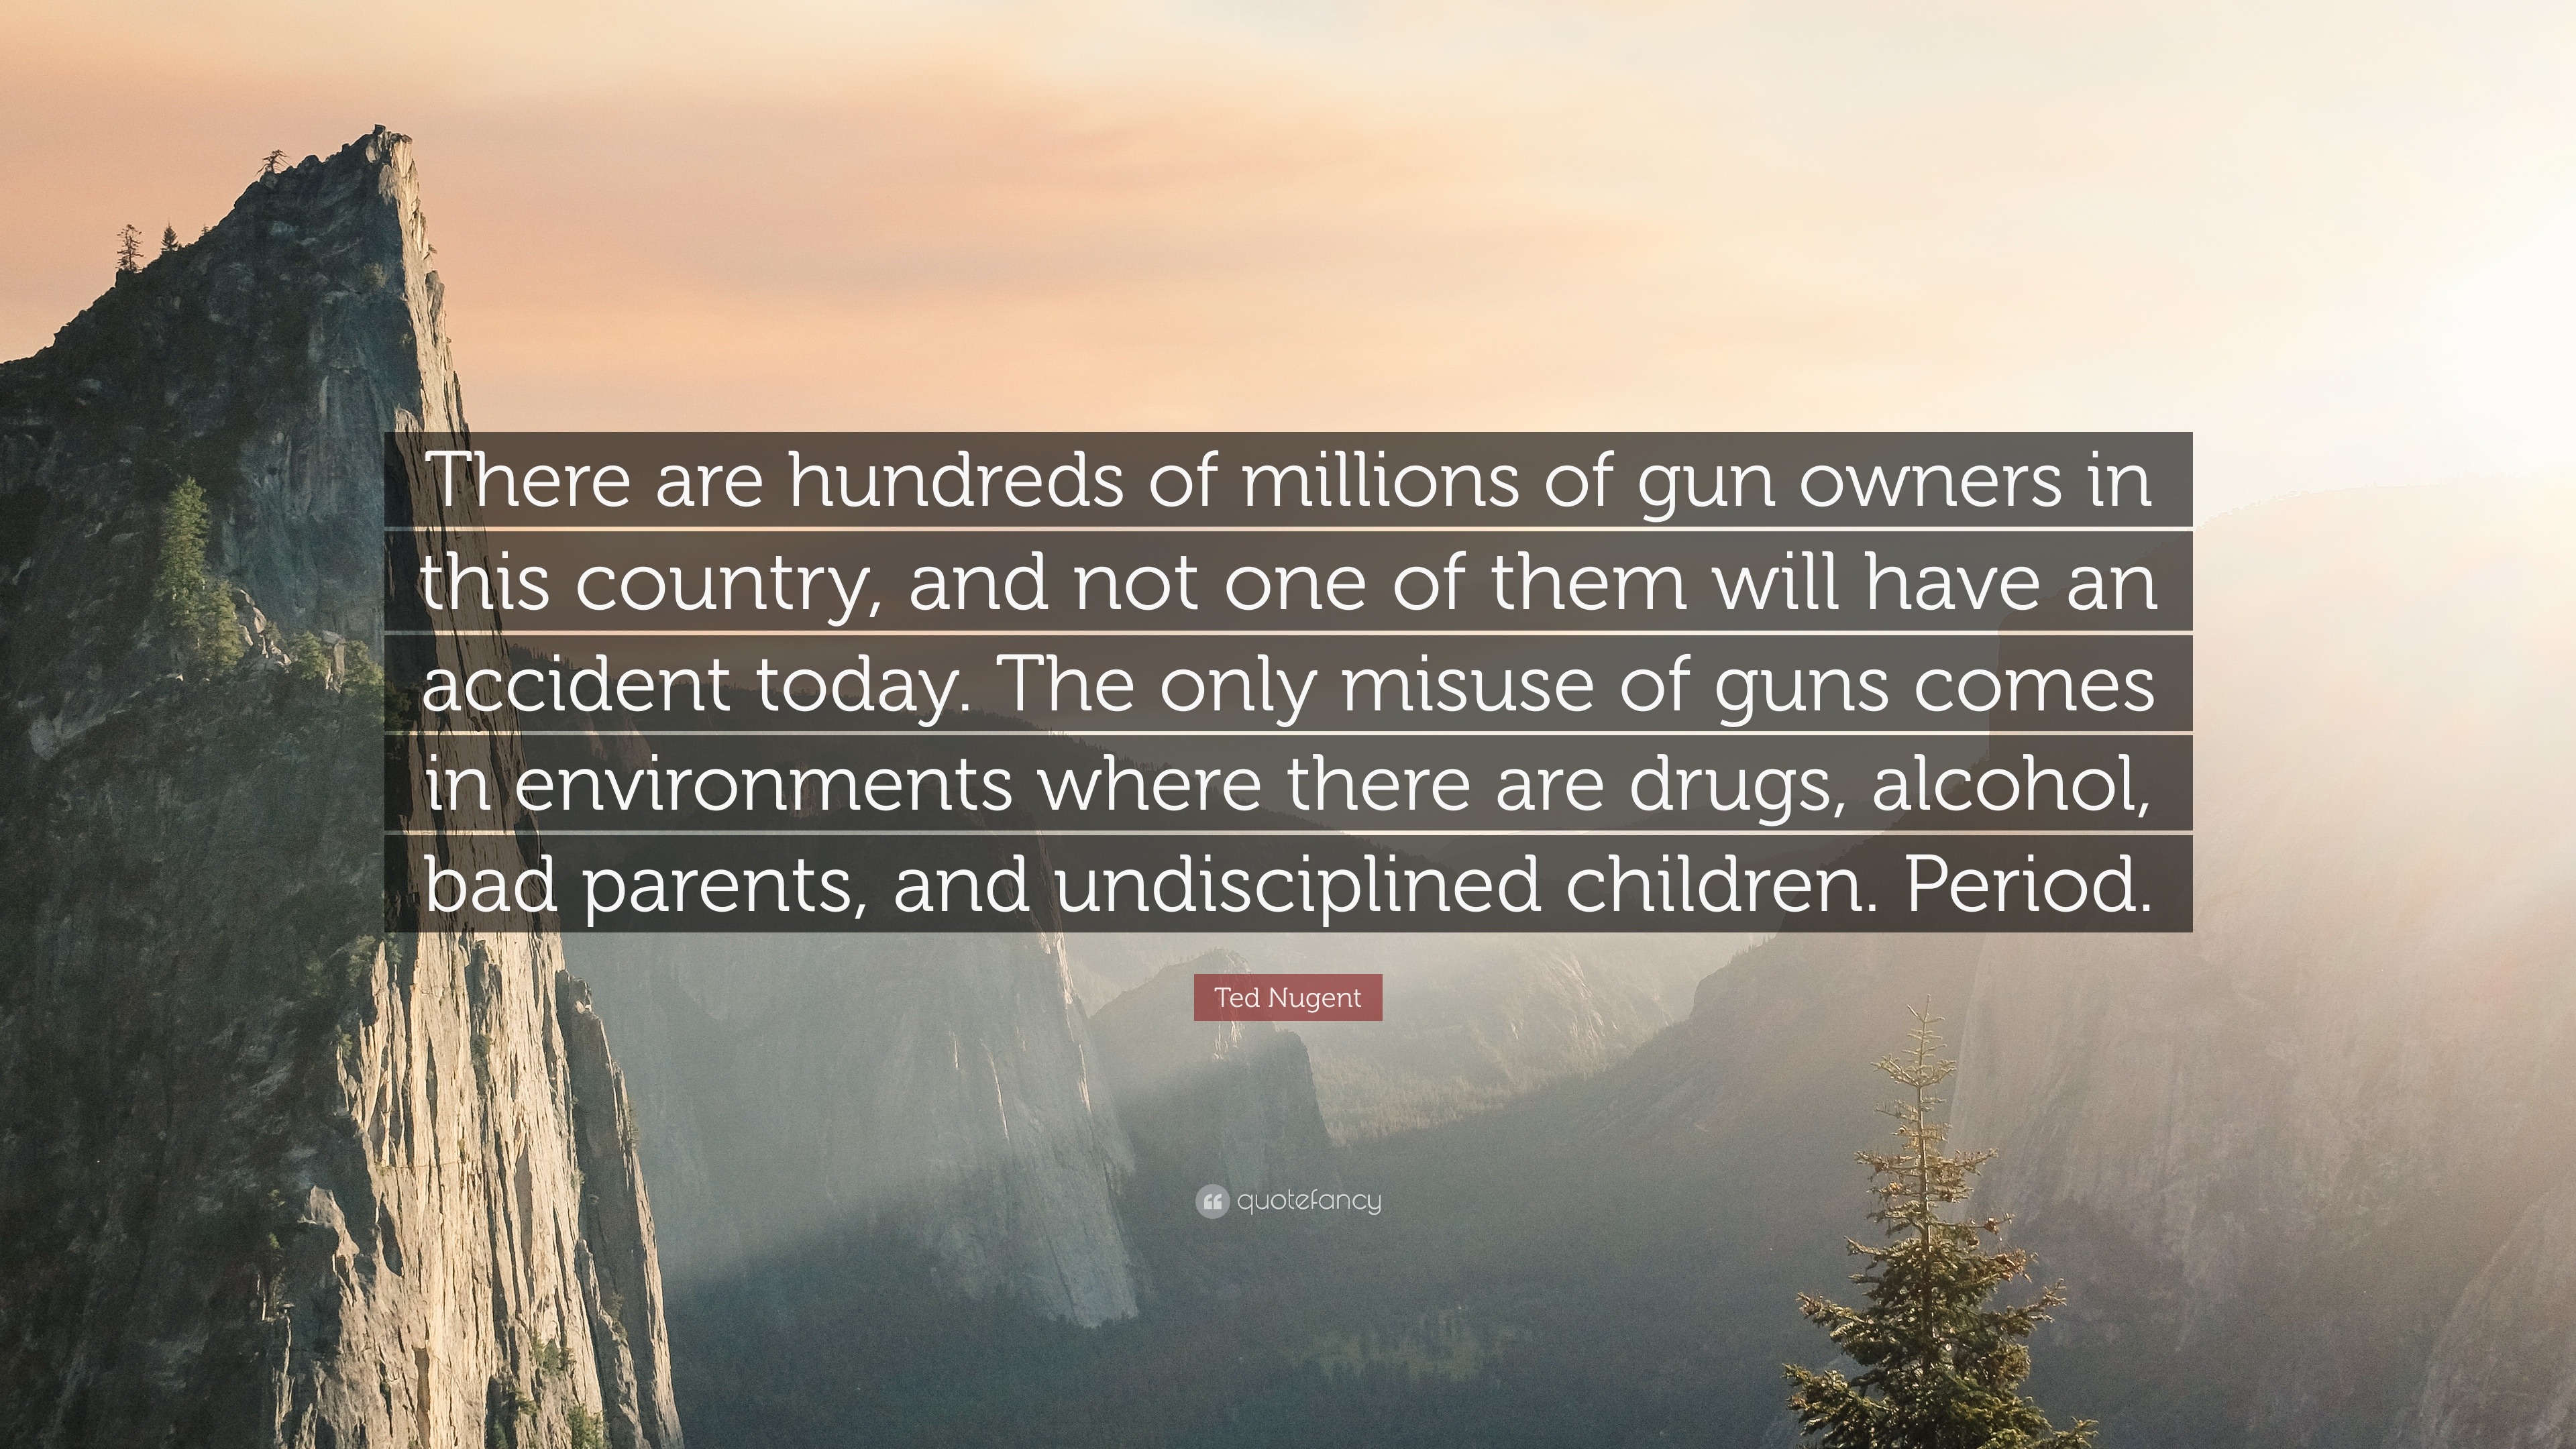 Ted Nugent Quote: “There are hundreds of millions of gun owners in this